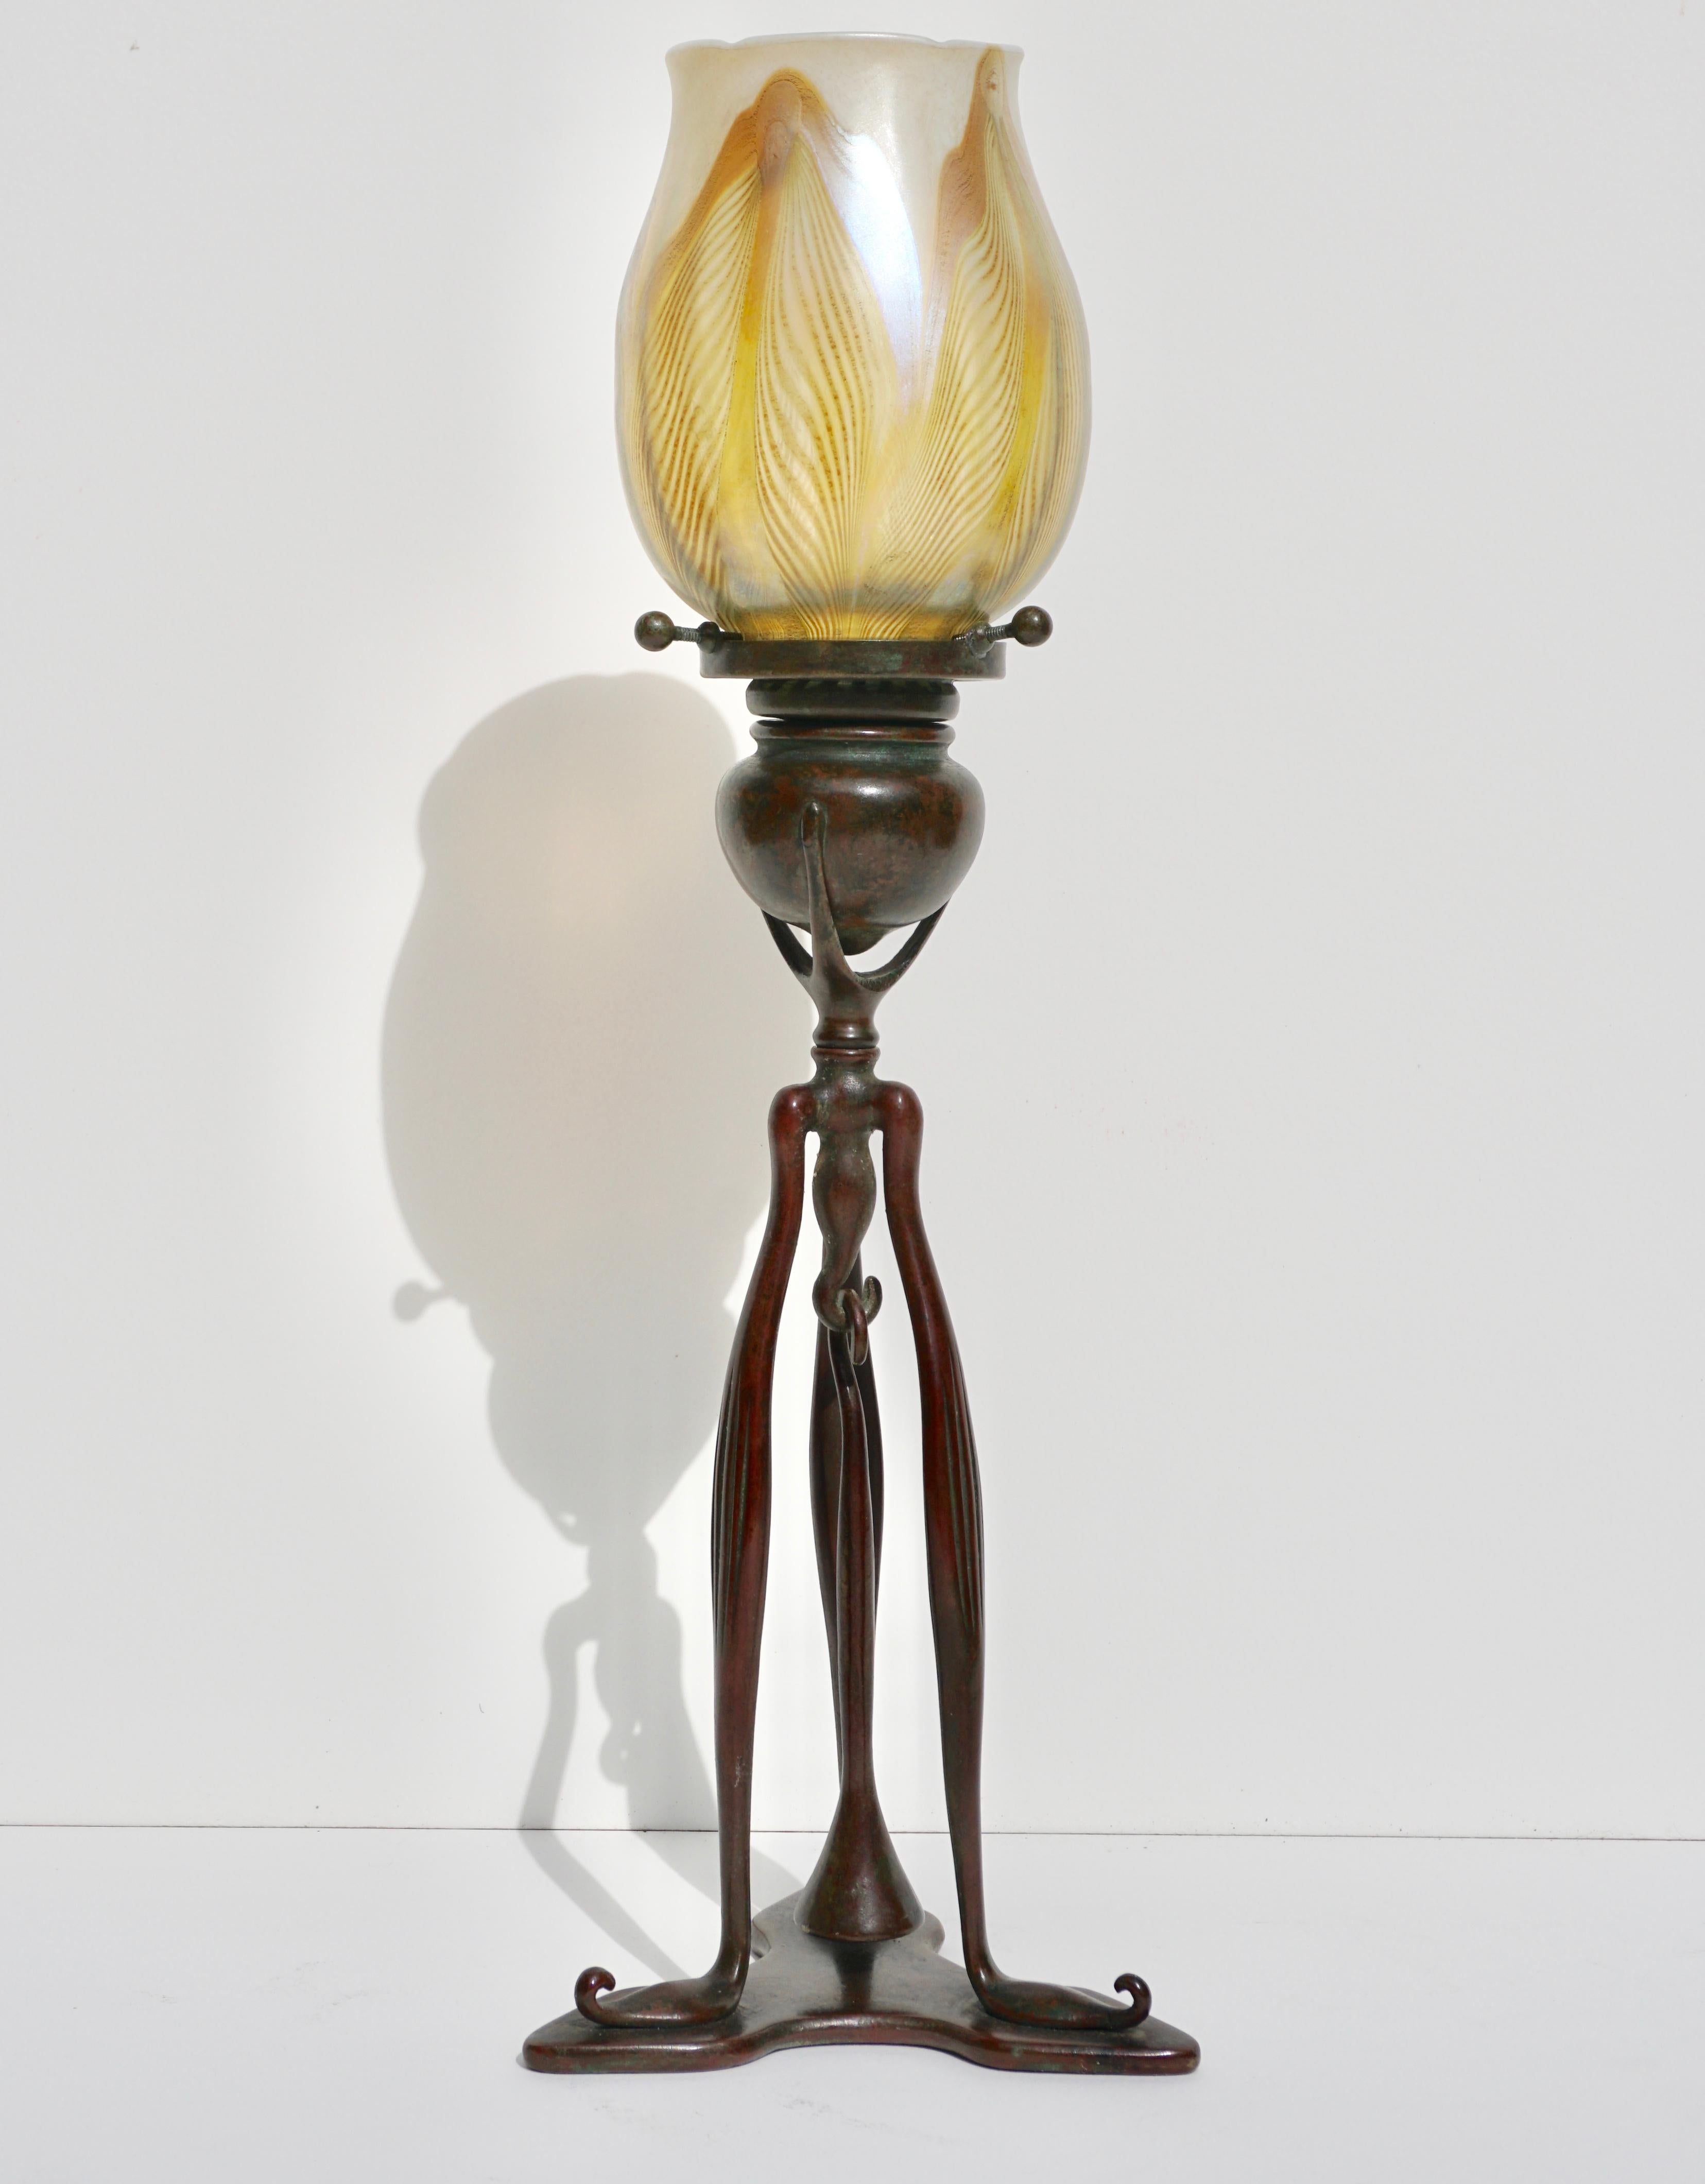 A beautiful Tiffany Studios New York 1212 Art Nouveau circa 1900 patinated bronze three legged candelabra with snuffer. With asssociated LCT Favrile pulled feather glass shade in colors or gold, green, white and yellow.

Candle stick marked